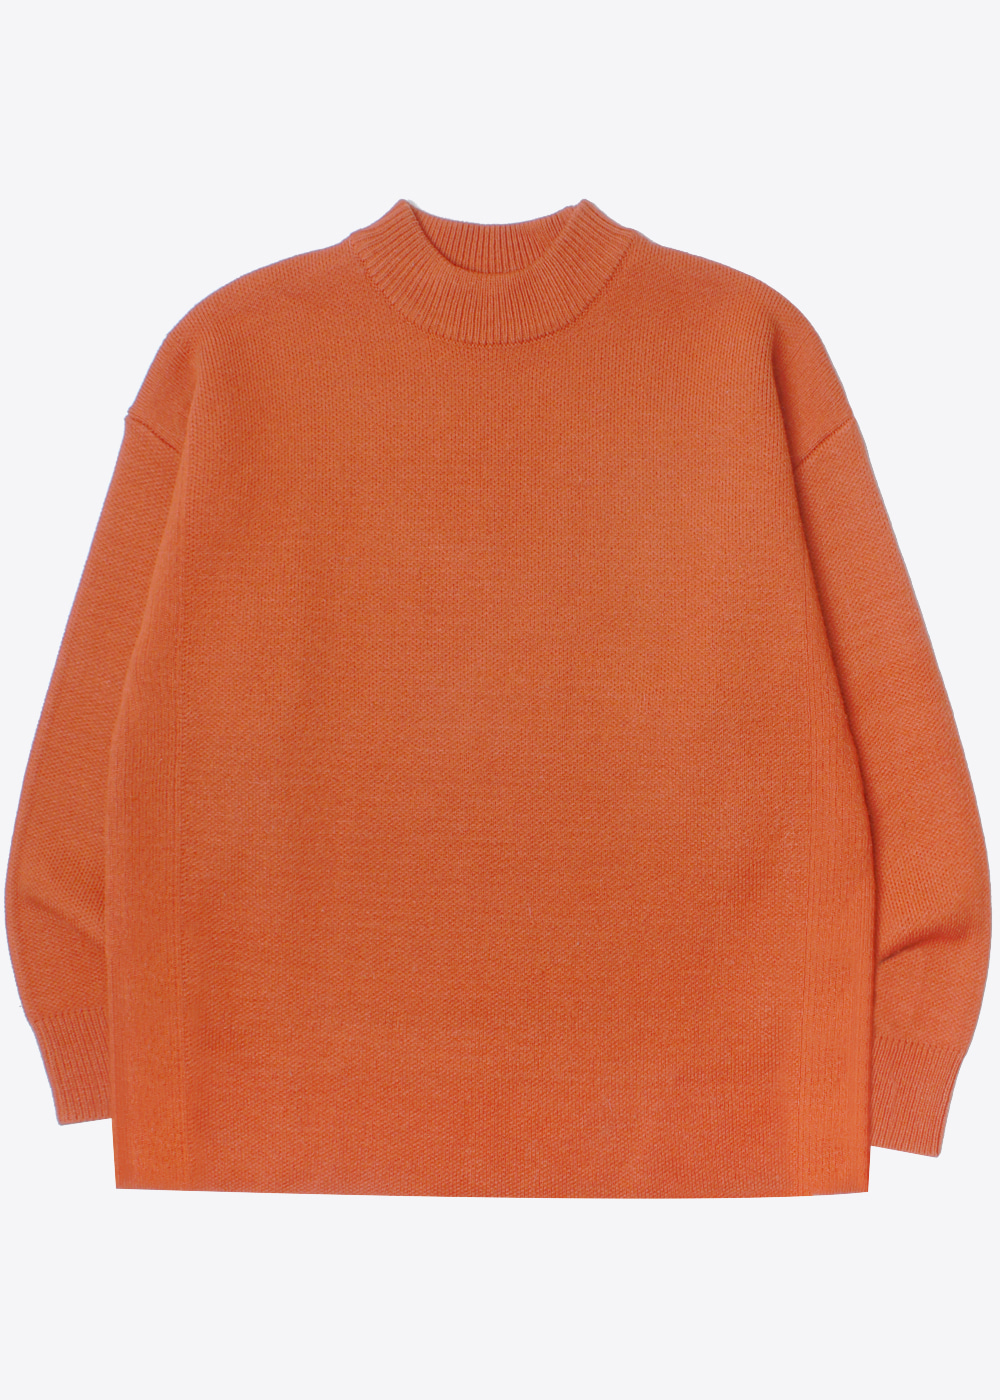 NIKO AND’over fit’ wool knit sweater